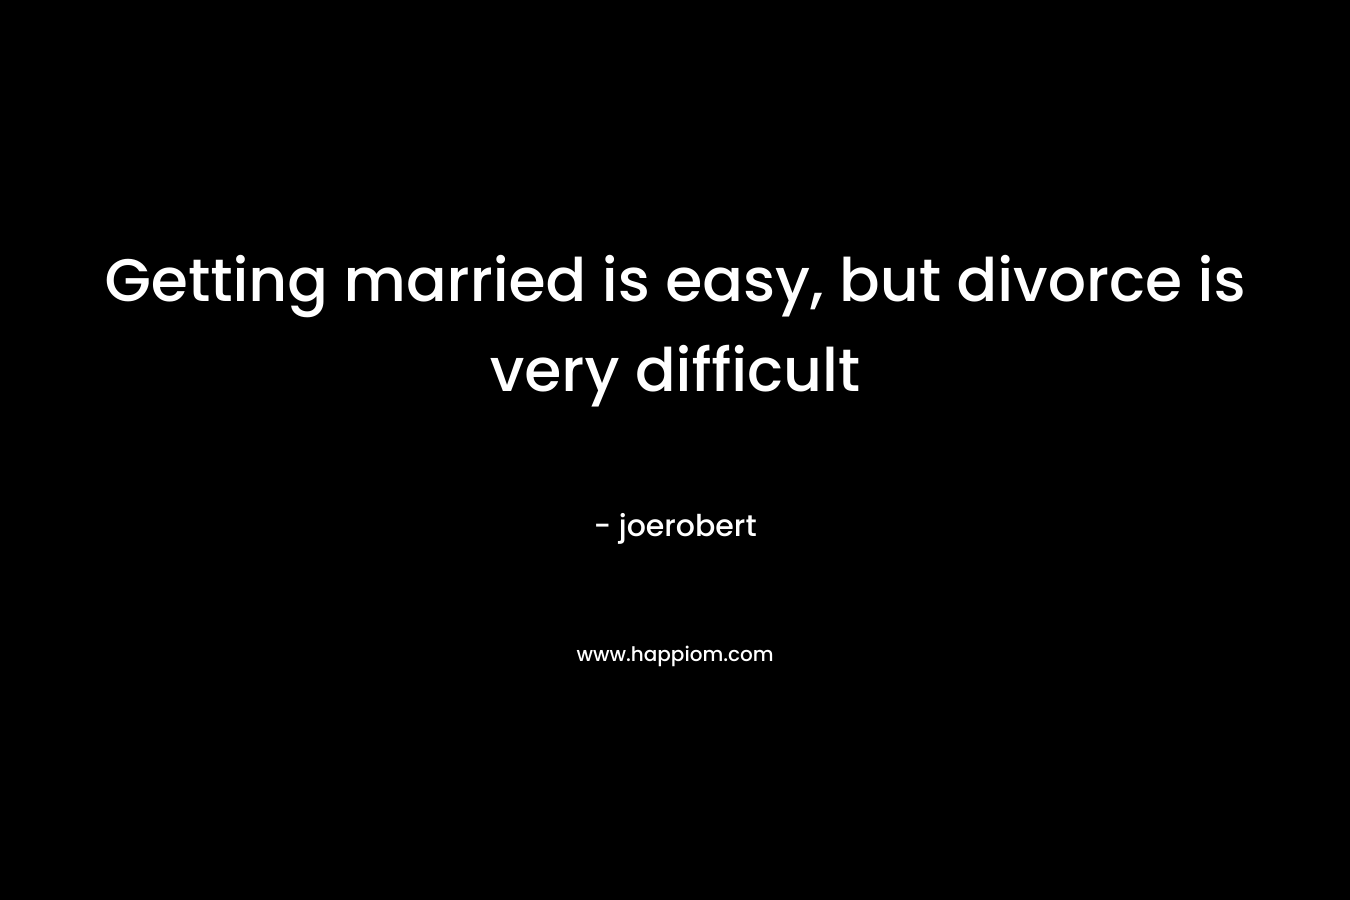 Getting married is easy, but divorce is very difficult